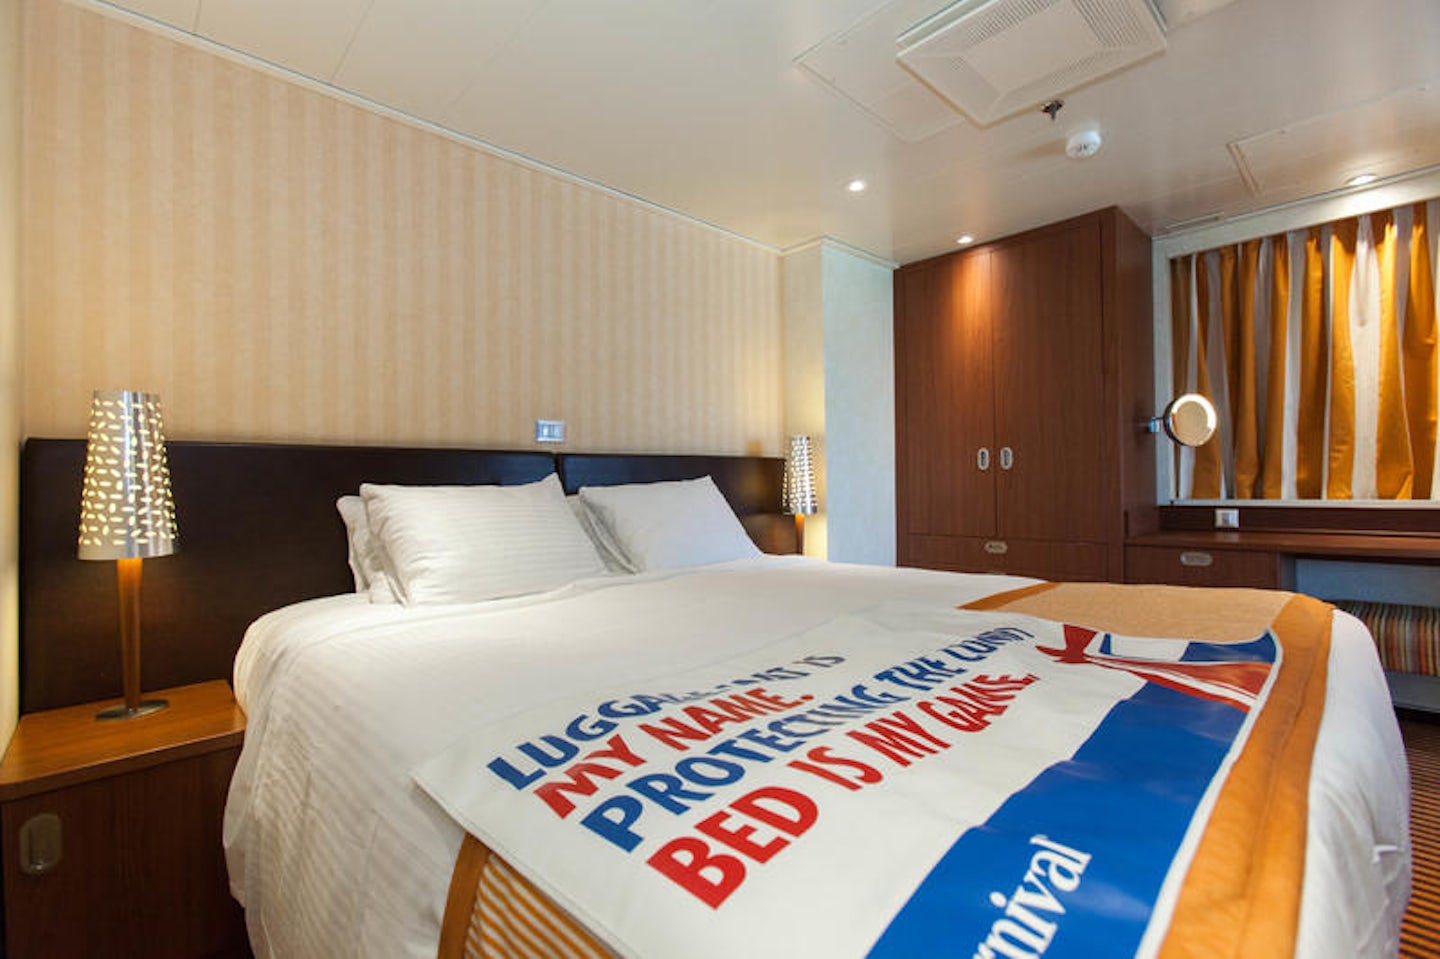 The Captain's Suite on Carnival Valor